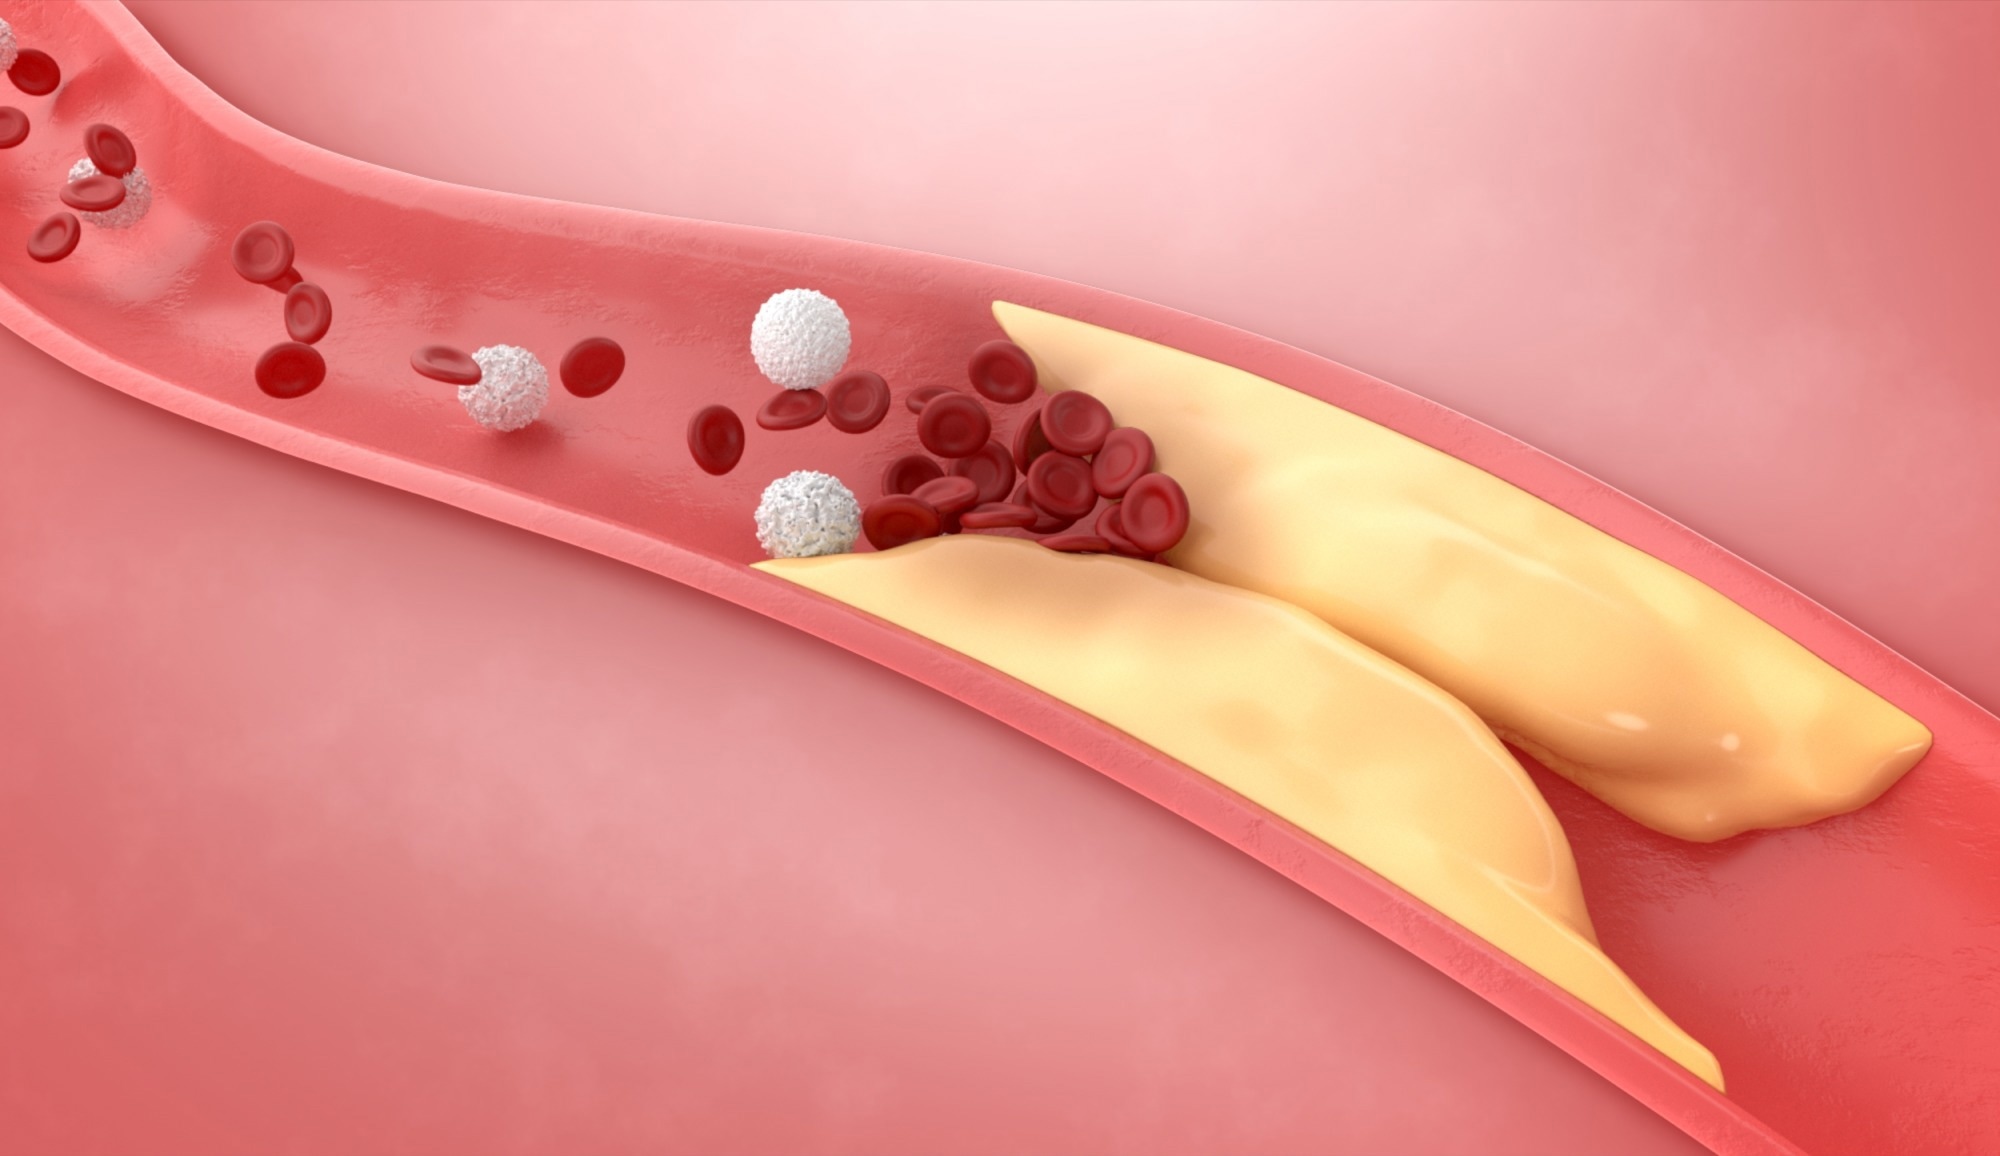 Thickened arteries and veins with cholesterol